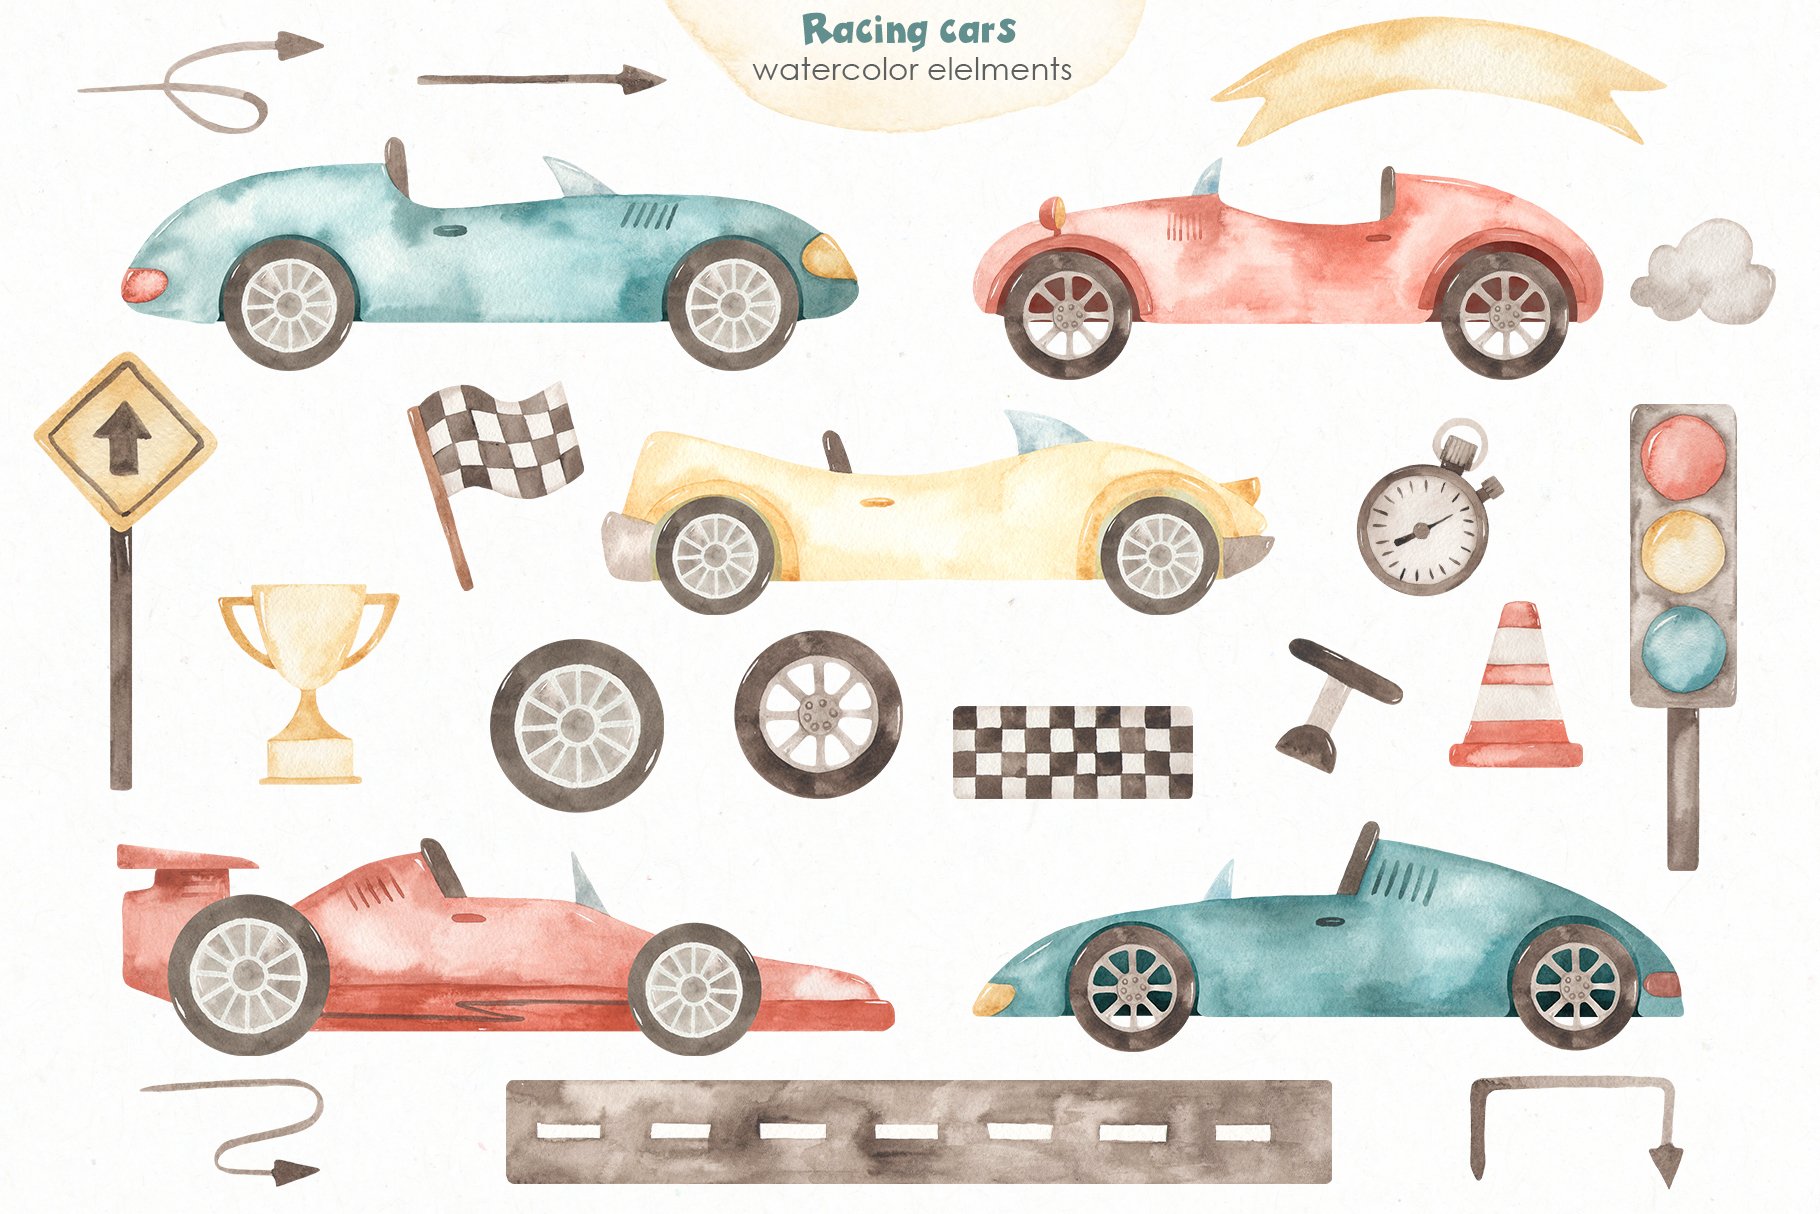 Pastel racing cars collection.